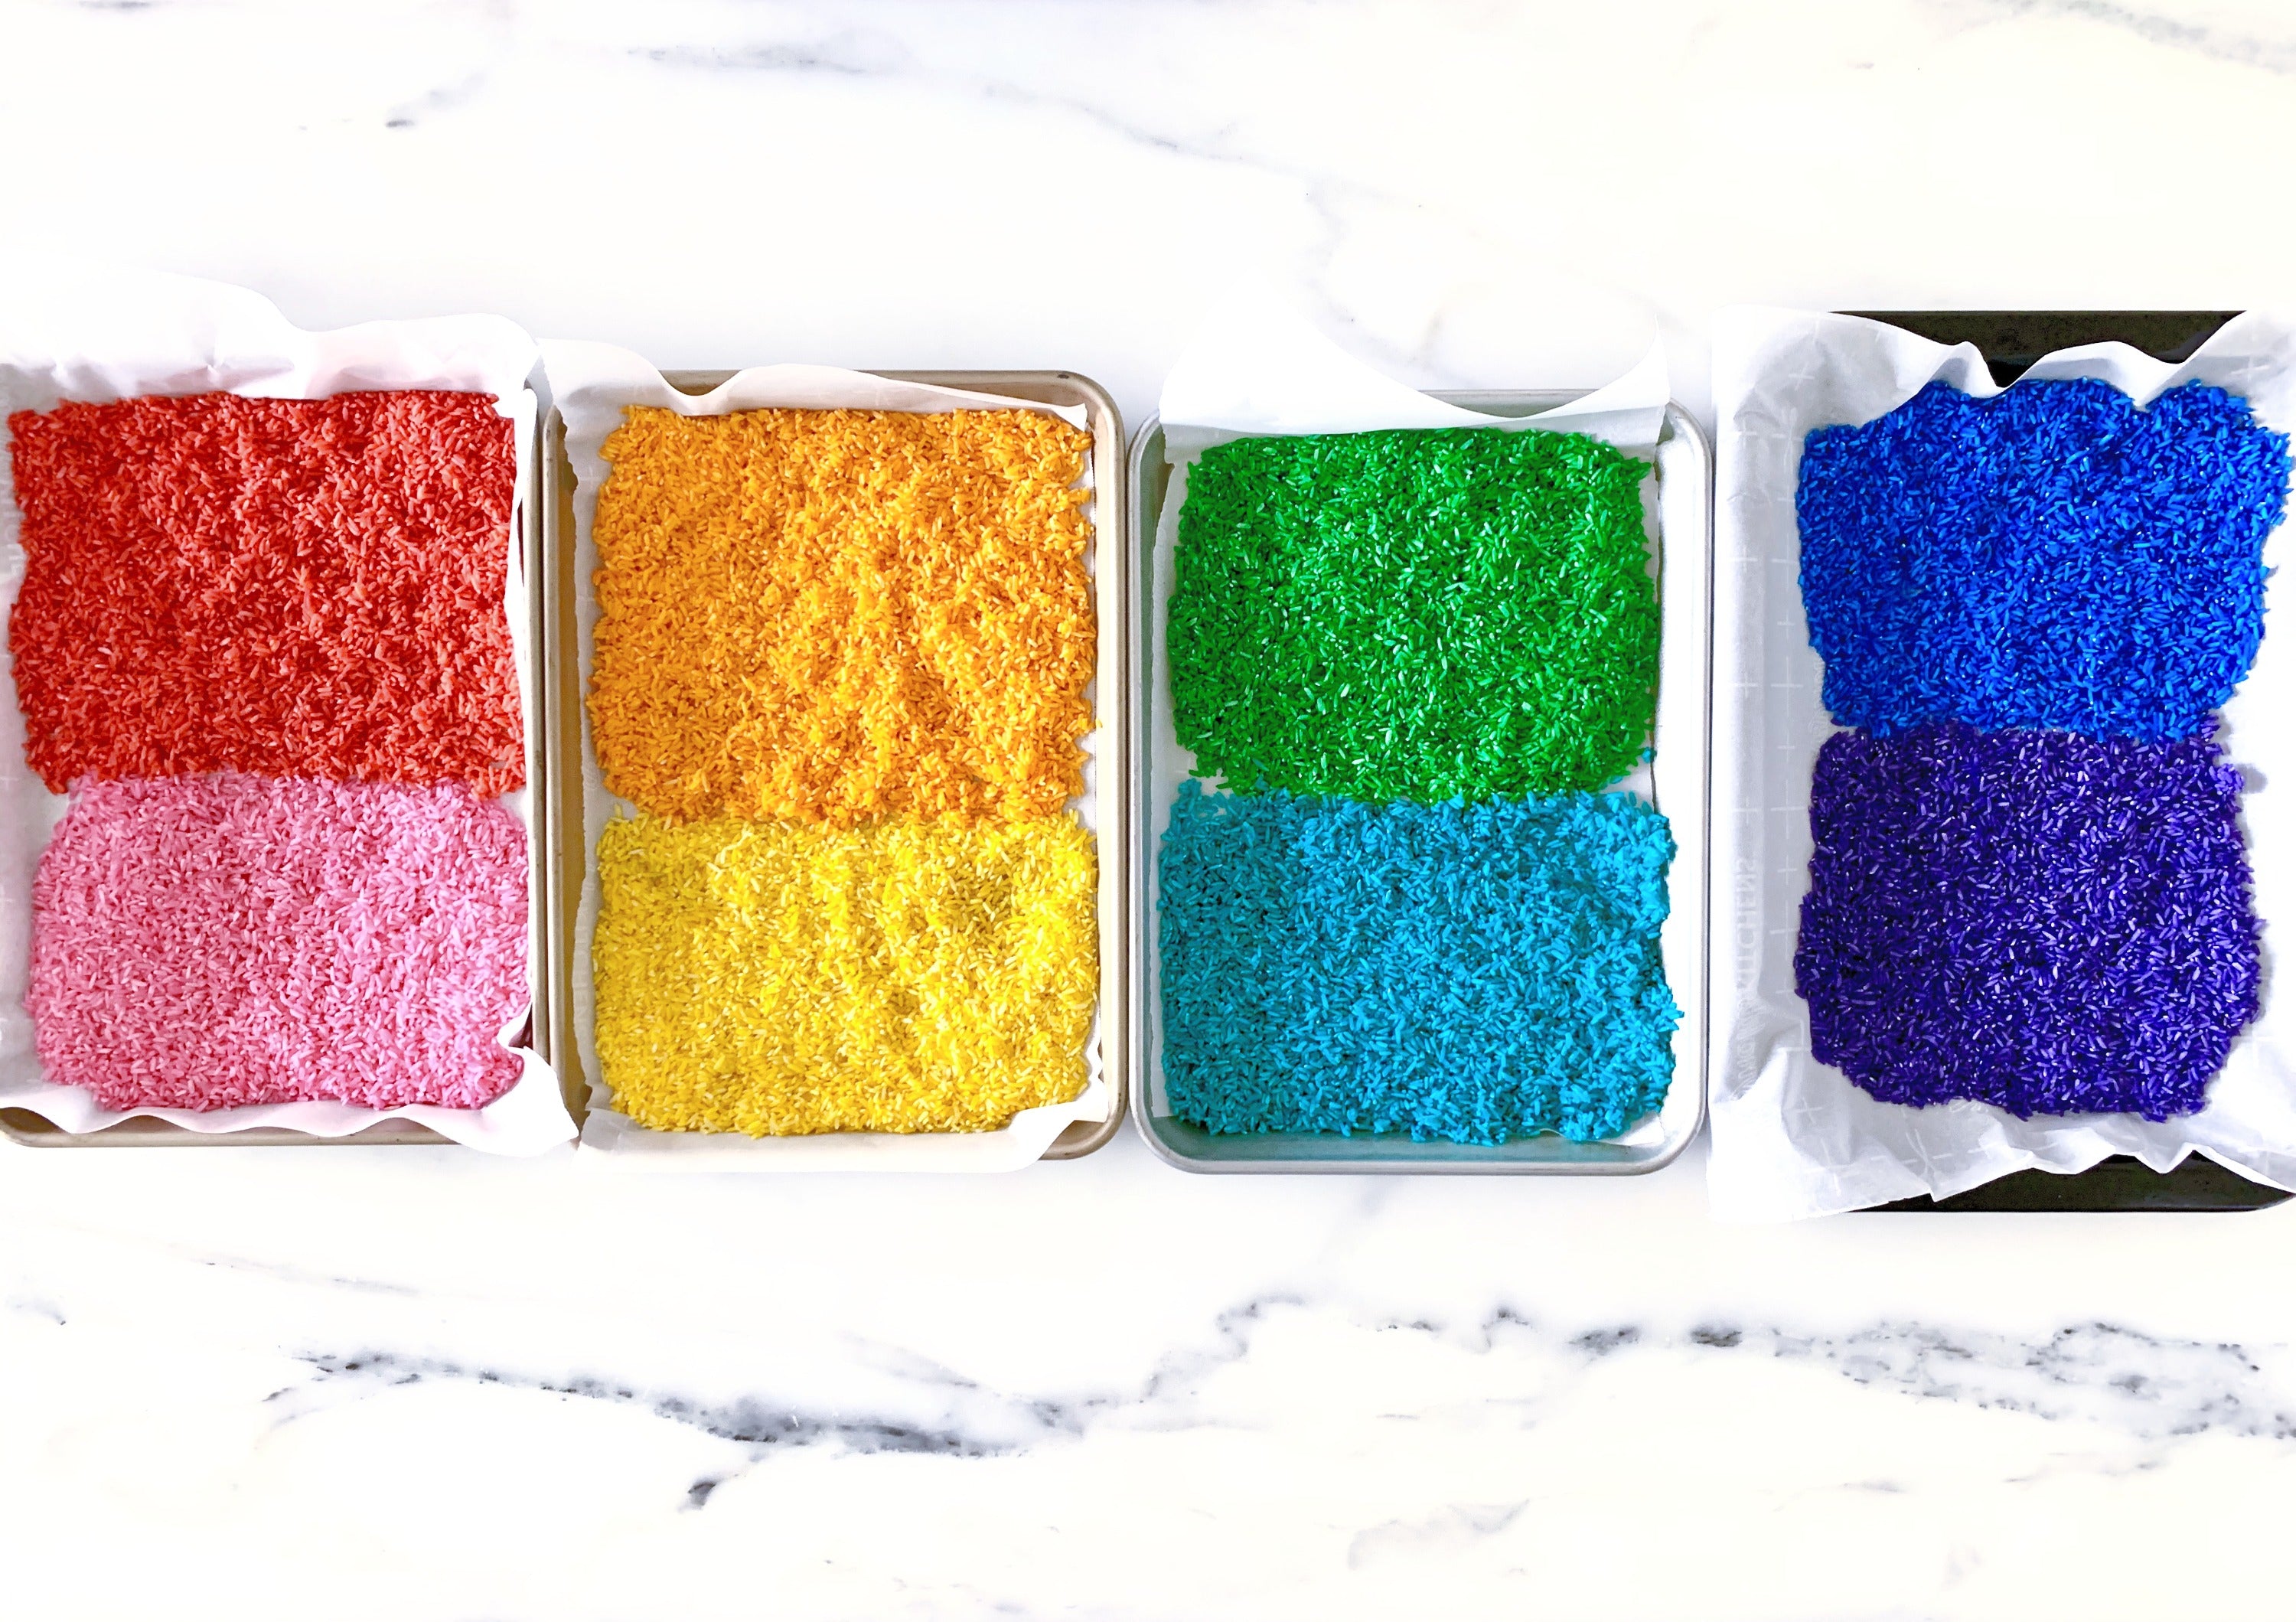 4 Ways to Sensory Play with Dyed Rice